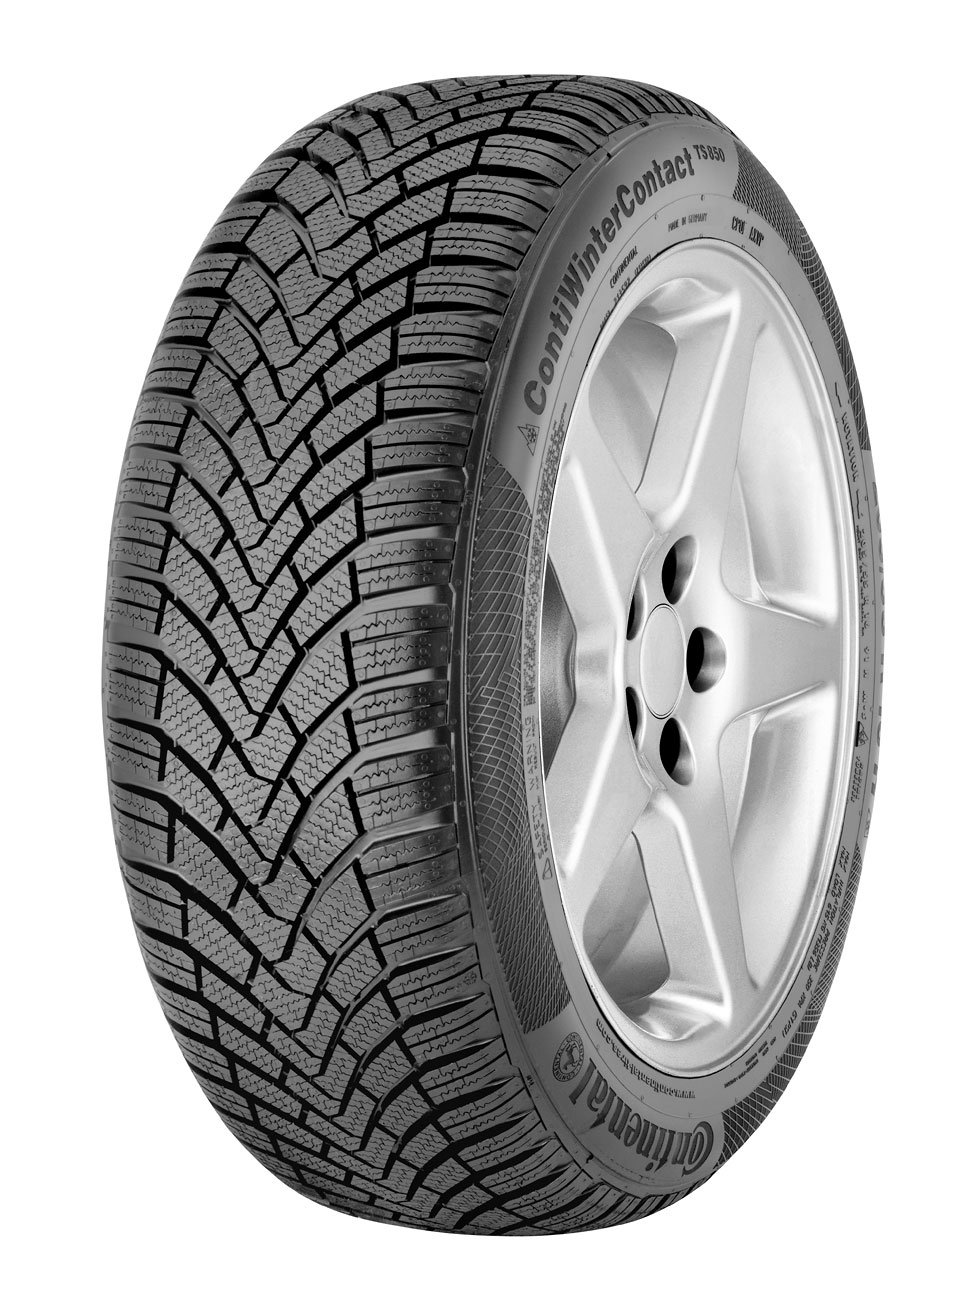 CONTINENTAL WINTER CONTACT TS850P 225/55R1797H